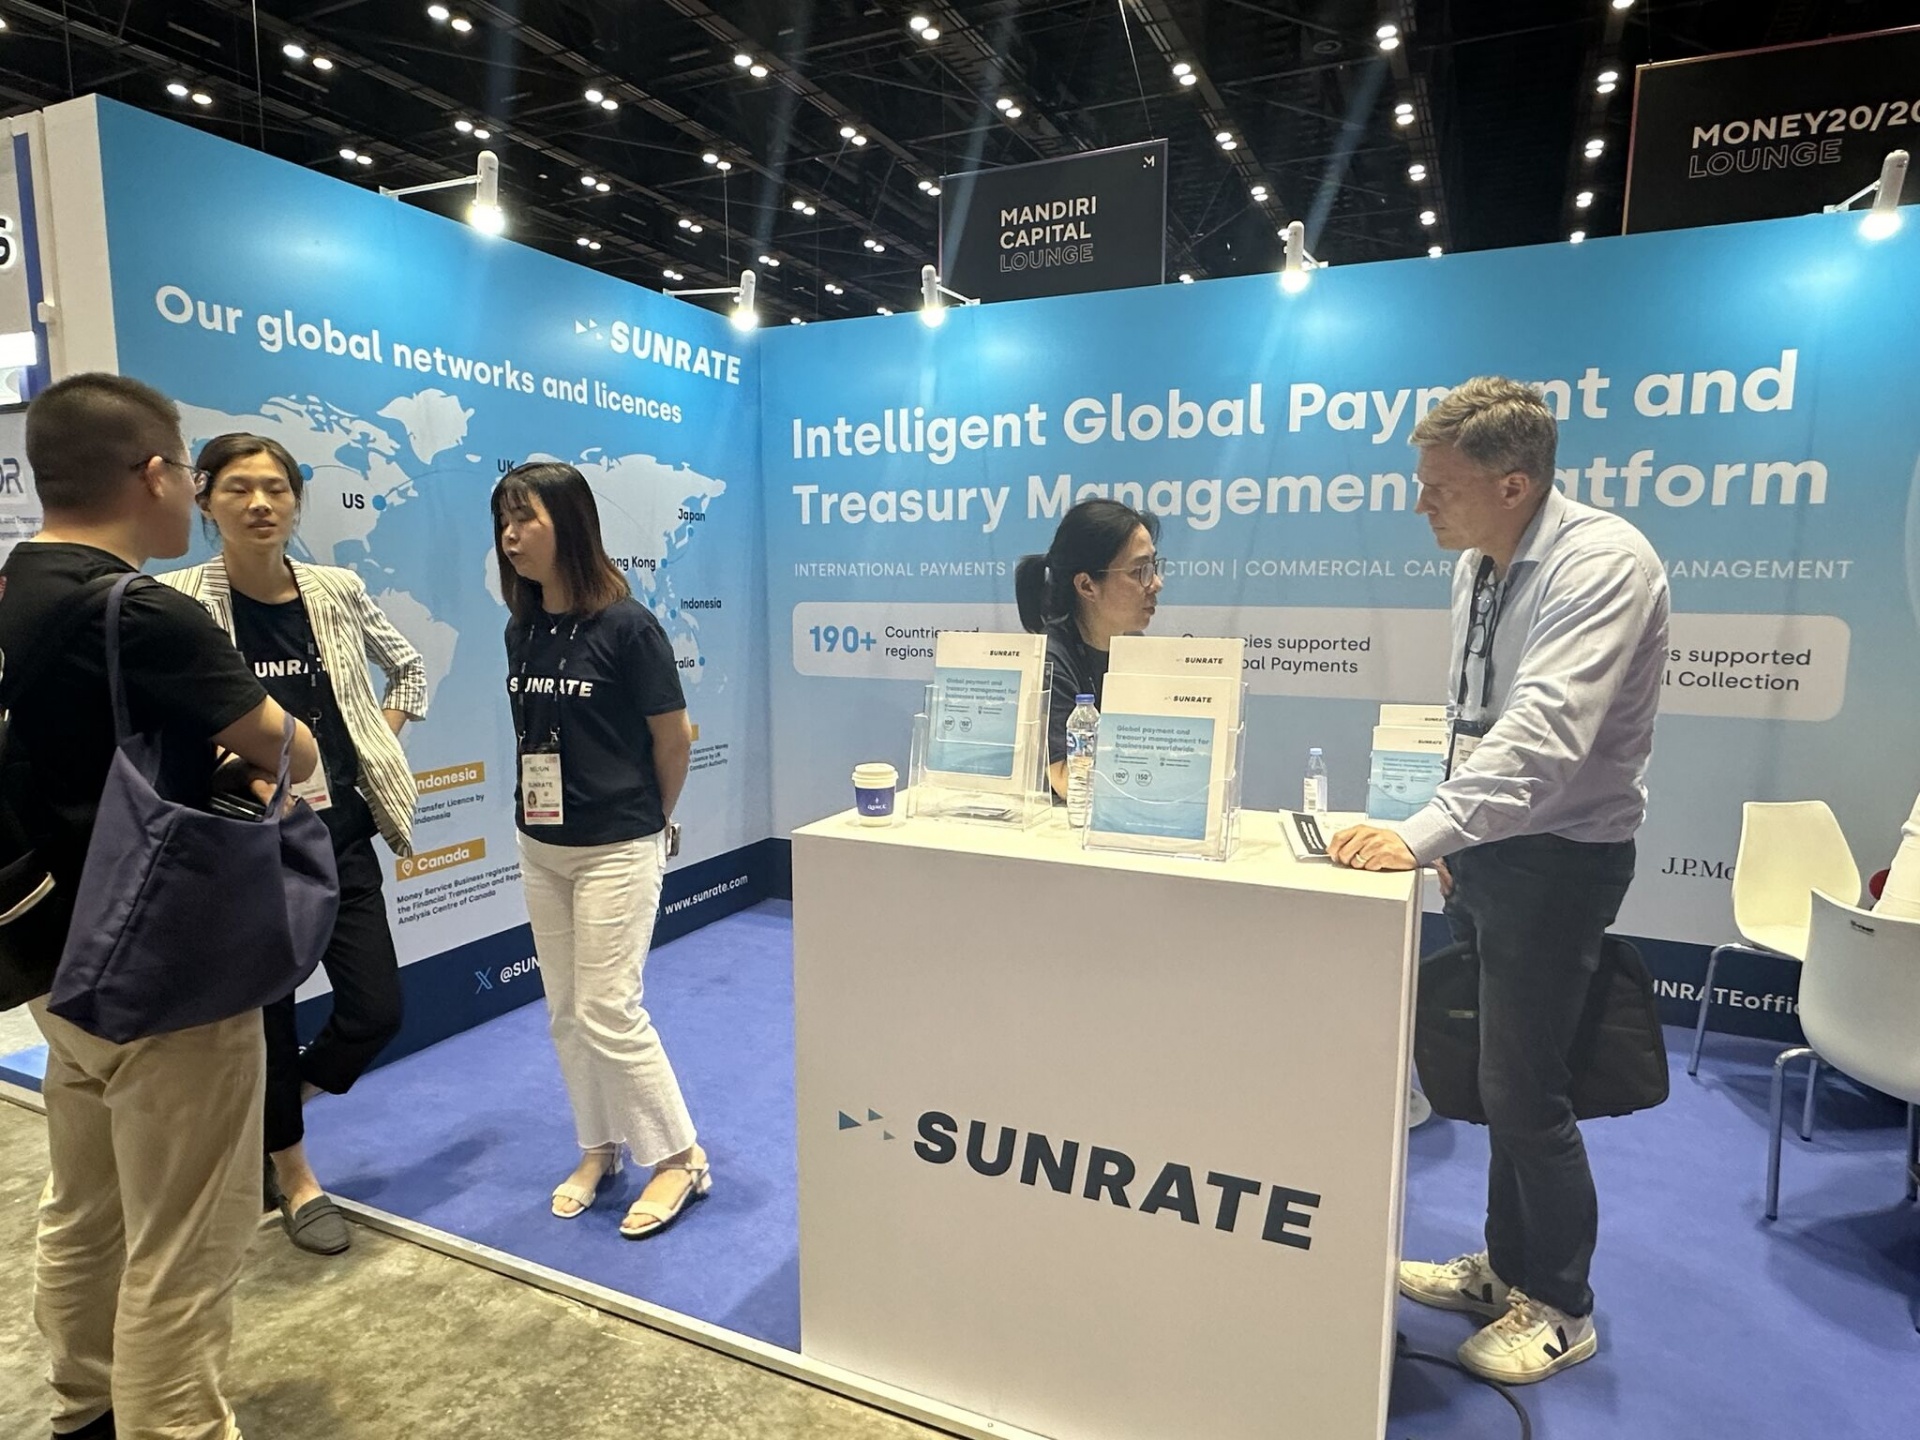 Singapore-headquartered Sunrate debuts in Vietnam's payment landscape